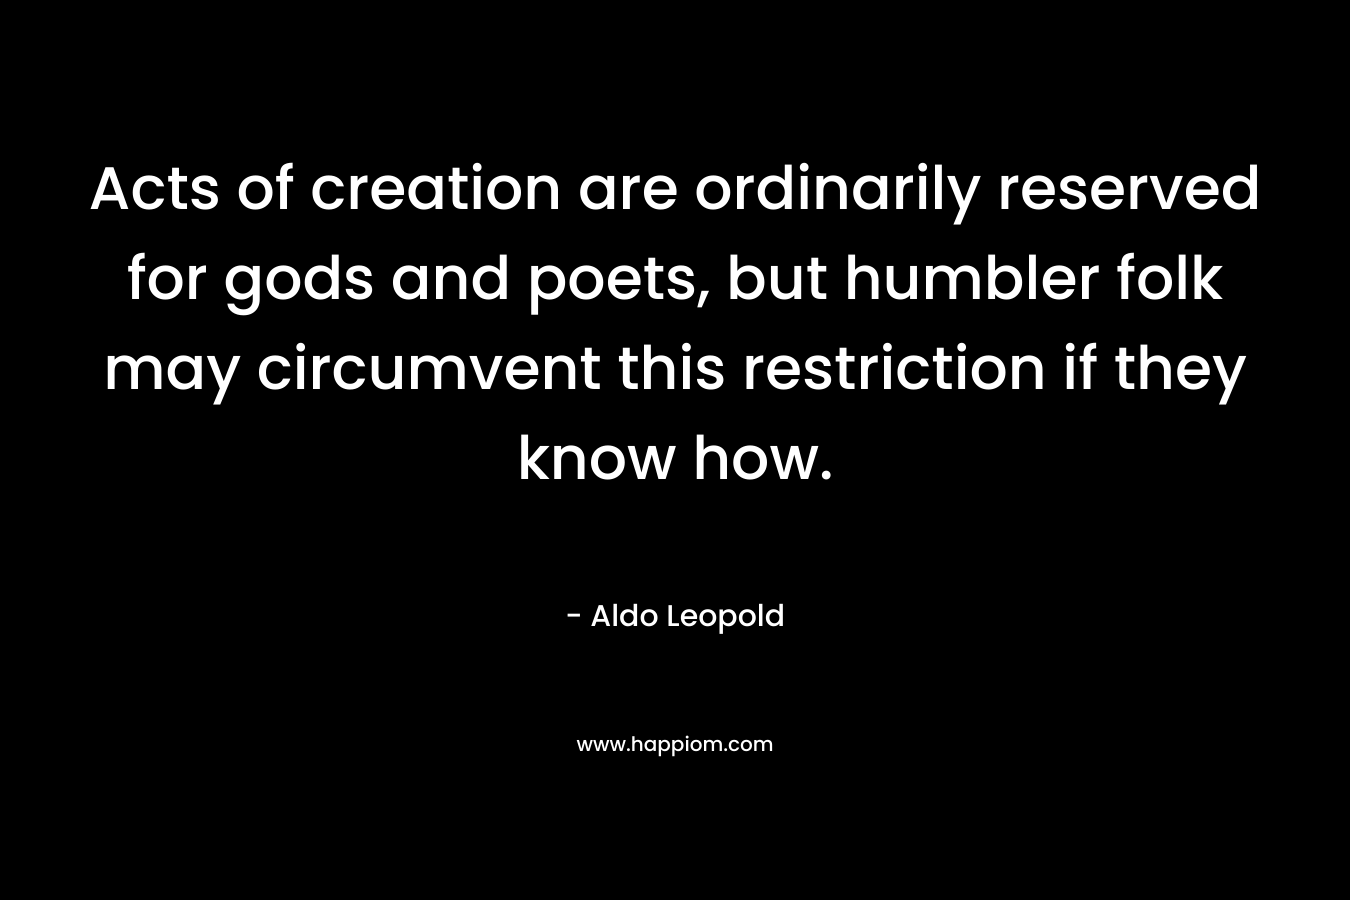 Acts of creation are ordinarily reserved for gods and poets, but humbler folk may circumvent this restriction if they know how. – Aldo Leopold